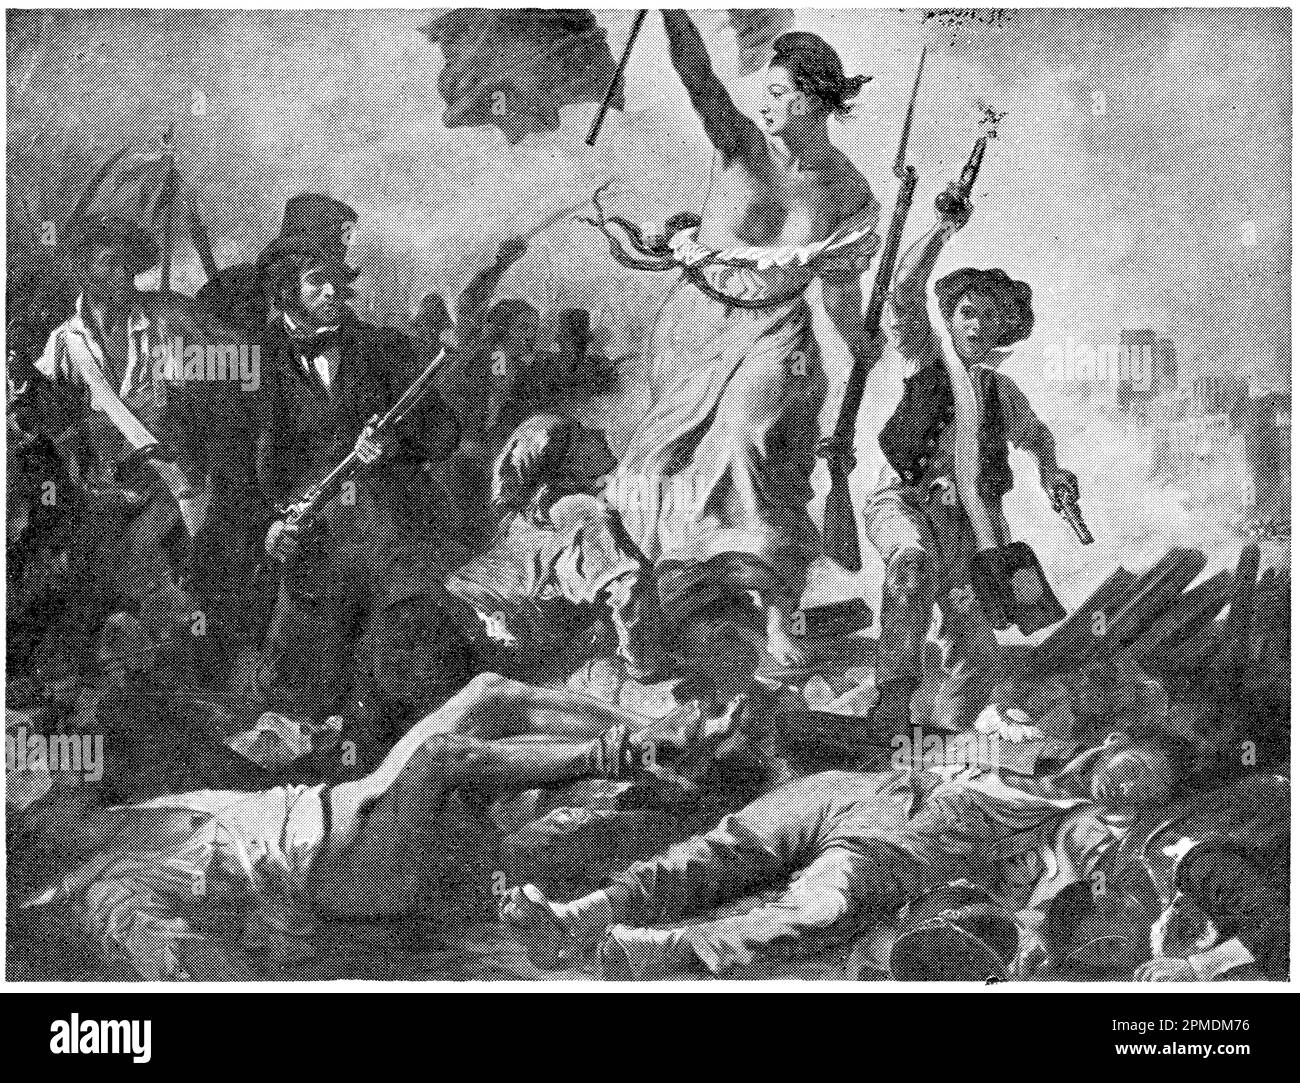 Liberty Leading the People by a French Romantic artist Eugene Delacroix. Publication of the book 'Meyers Konversations-Lexikon', Volume 2, Leipzig, Germany, 1910 Stock Photo